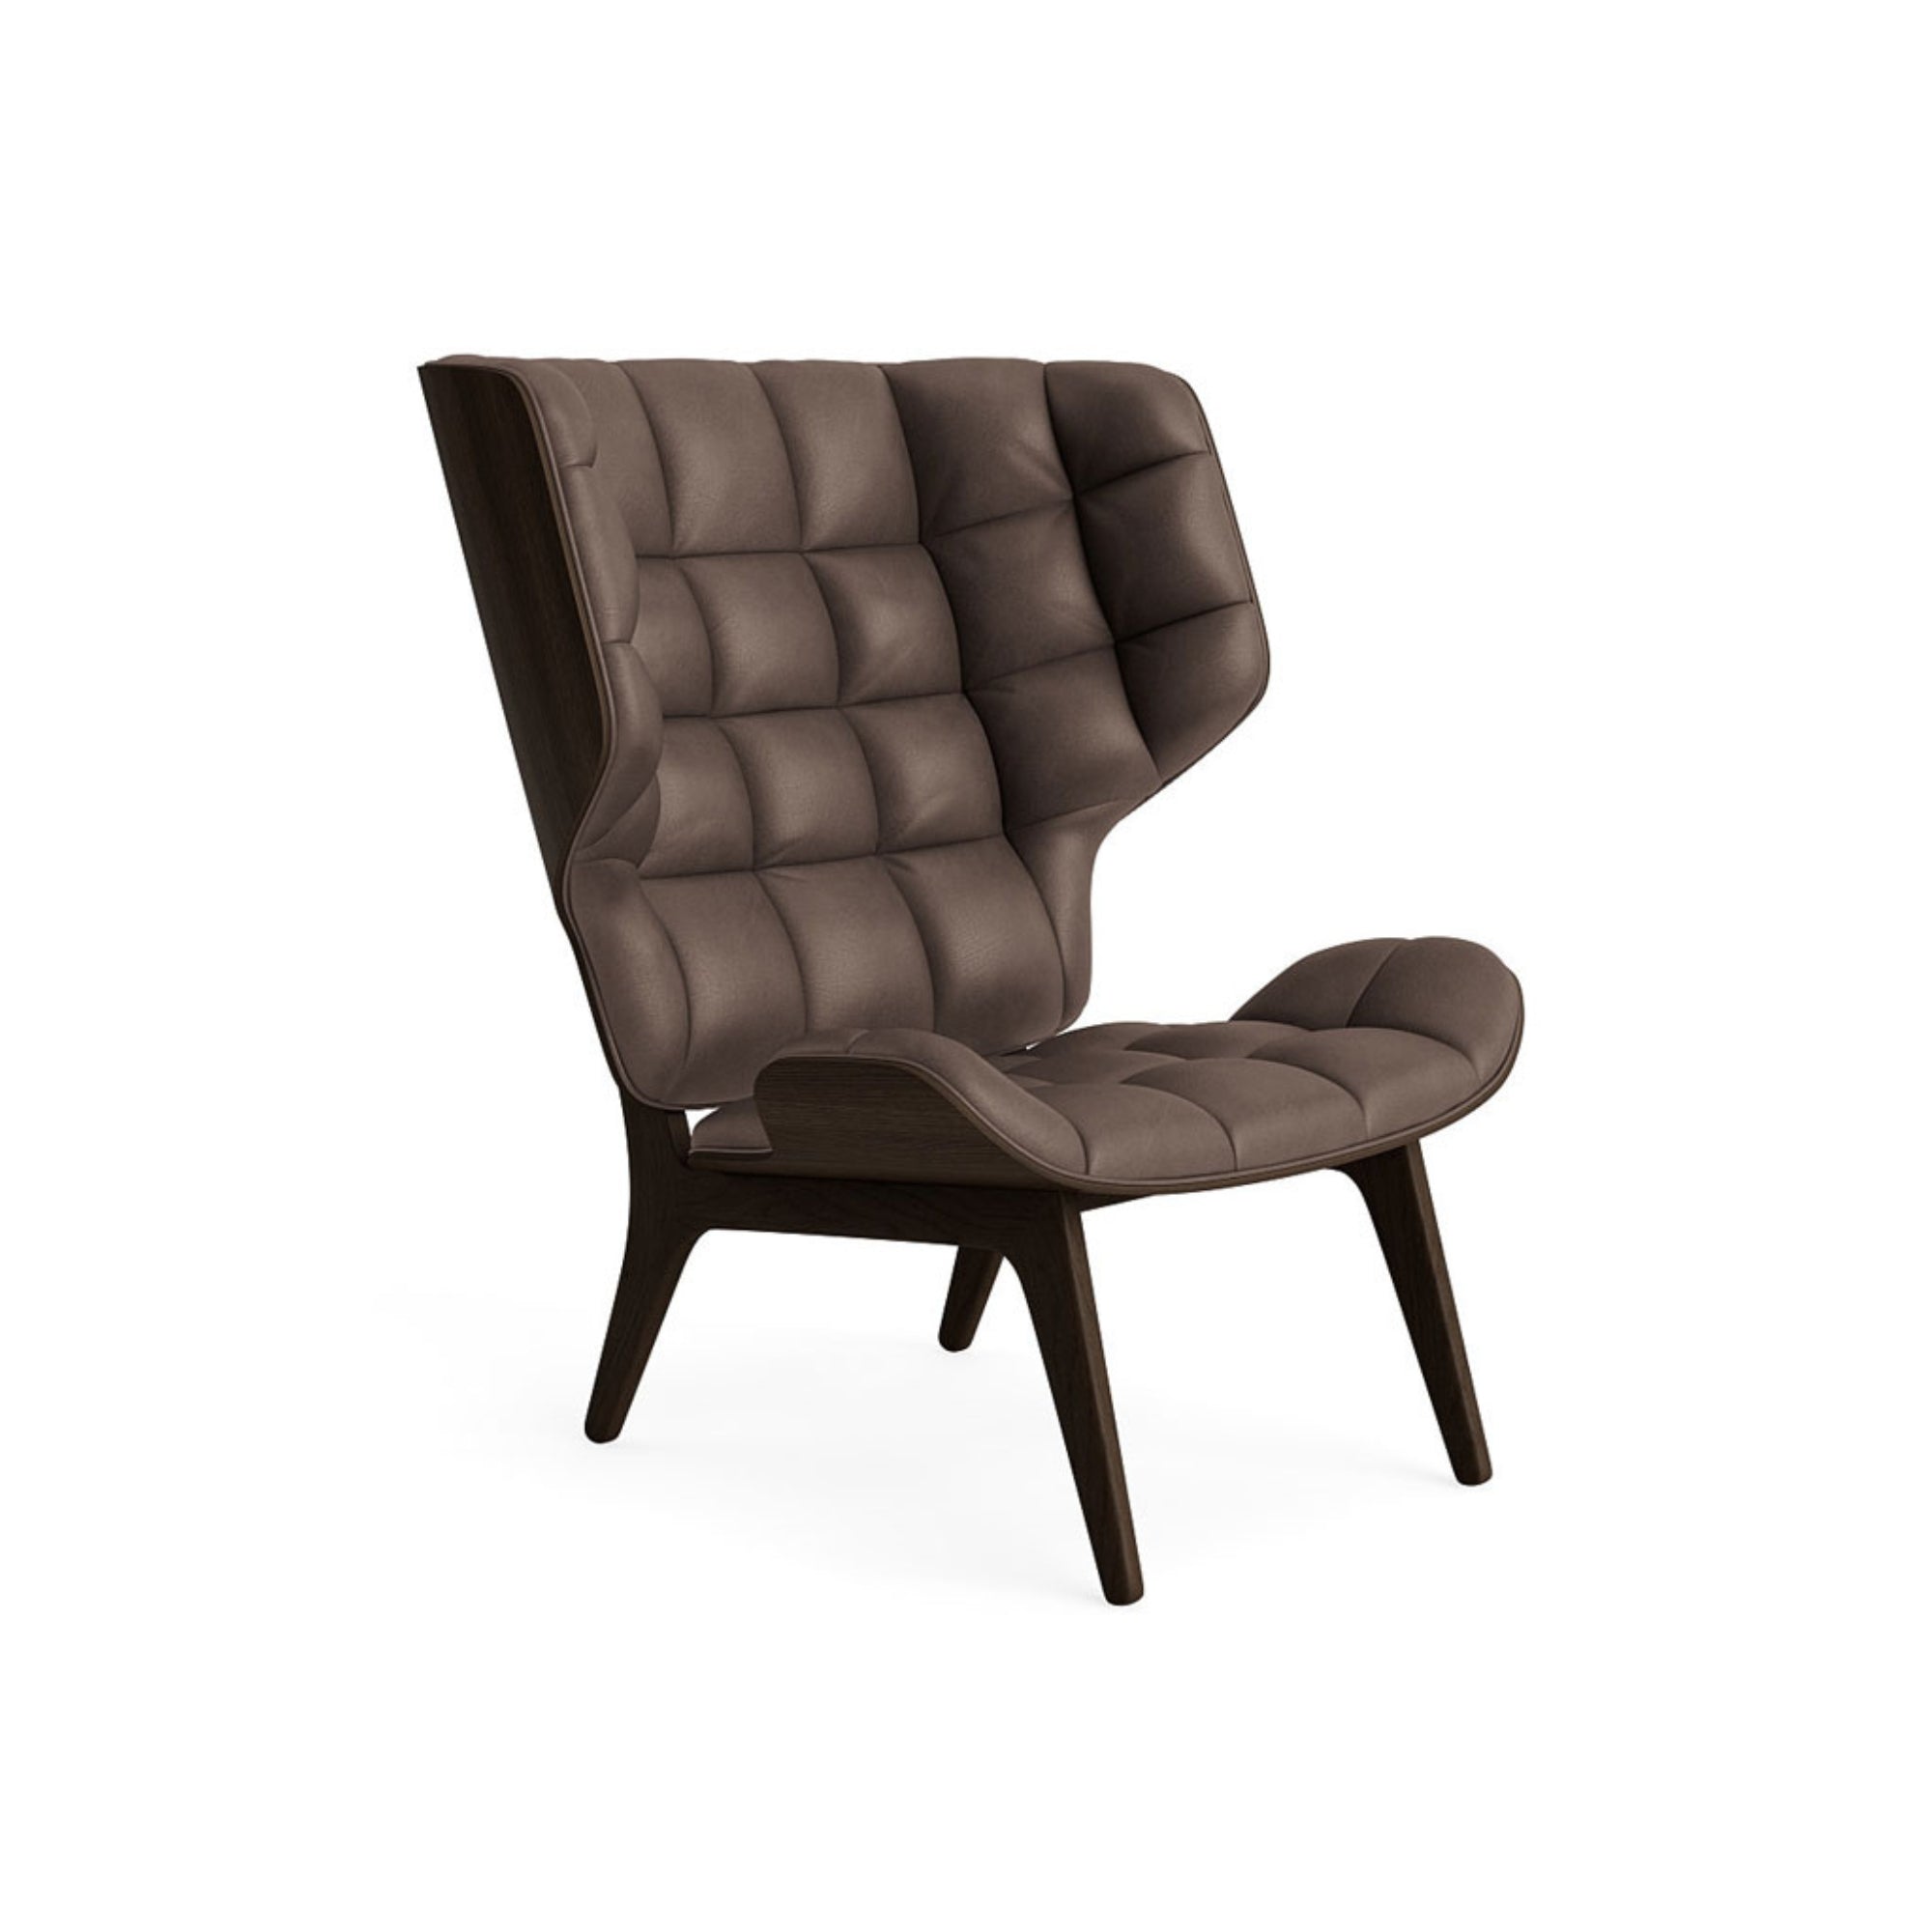 Mammoth Chair - Leather Armchair NORR11